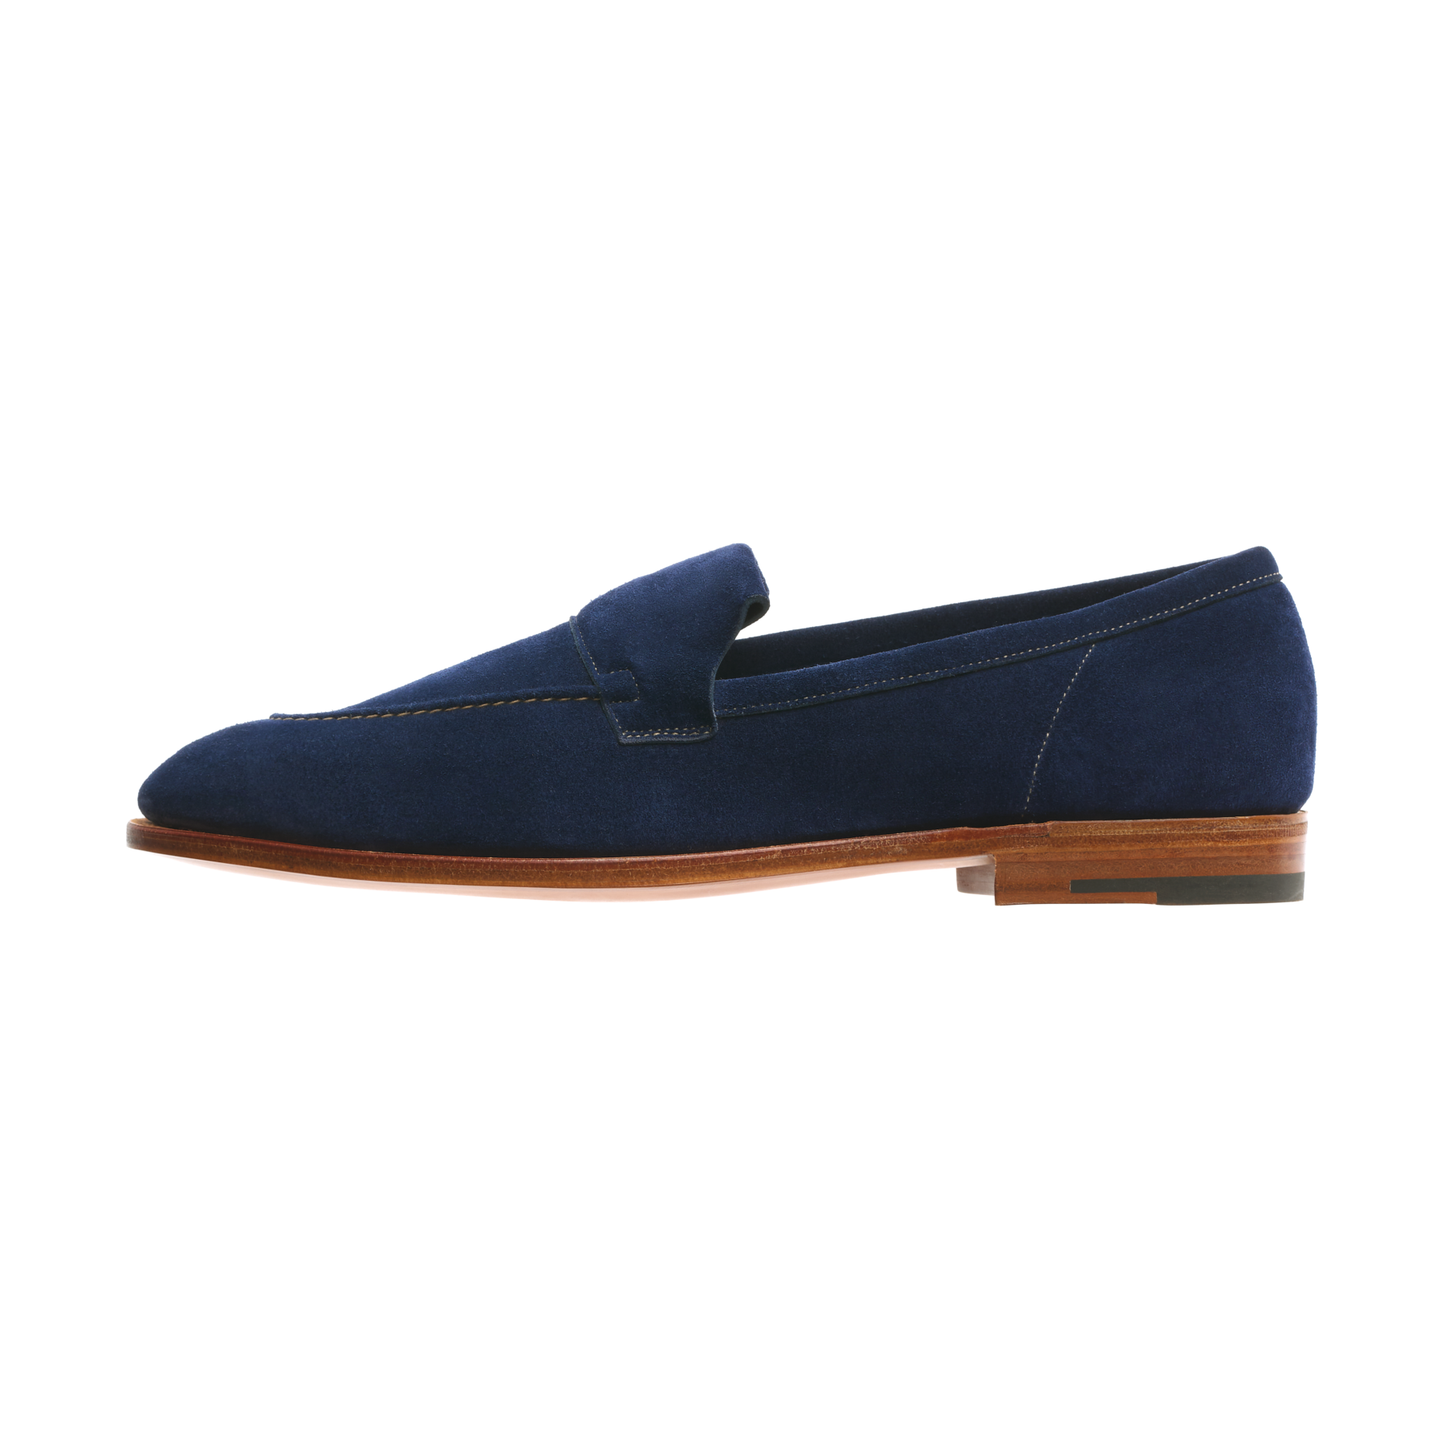 John Lobb "Aley" Suede Loafer with Hand-Stitched Apron in Royal Blue - SARTALE